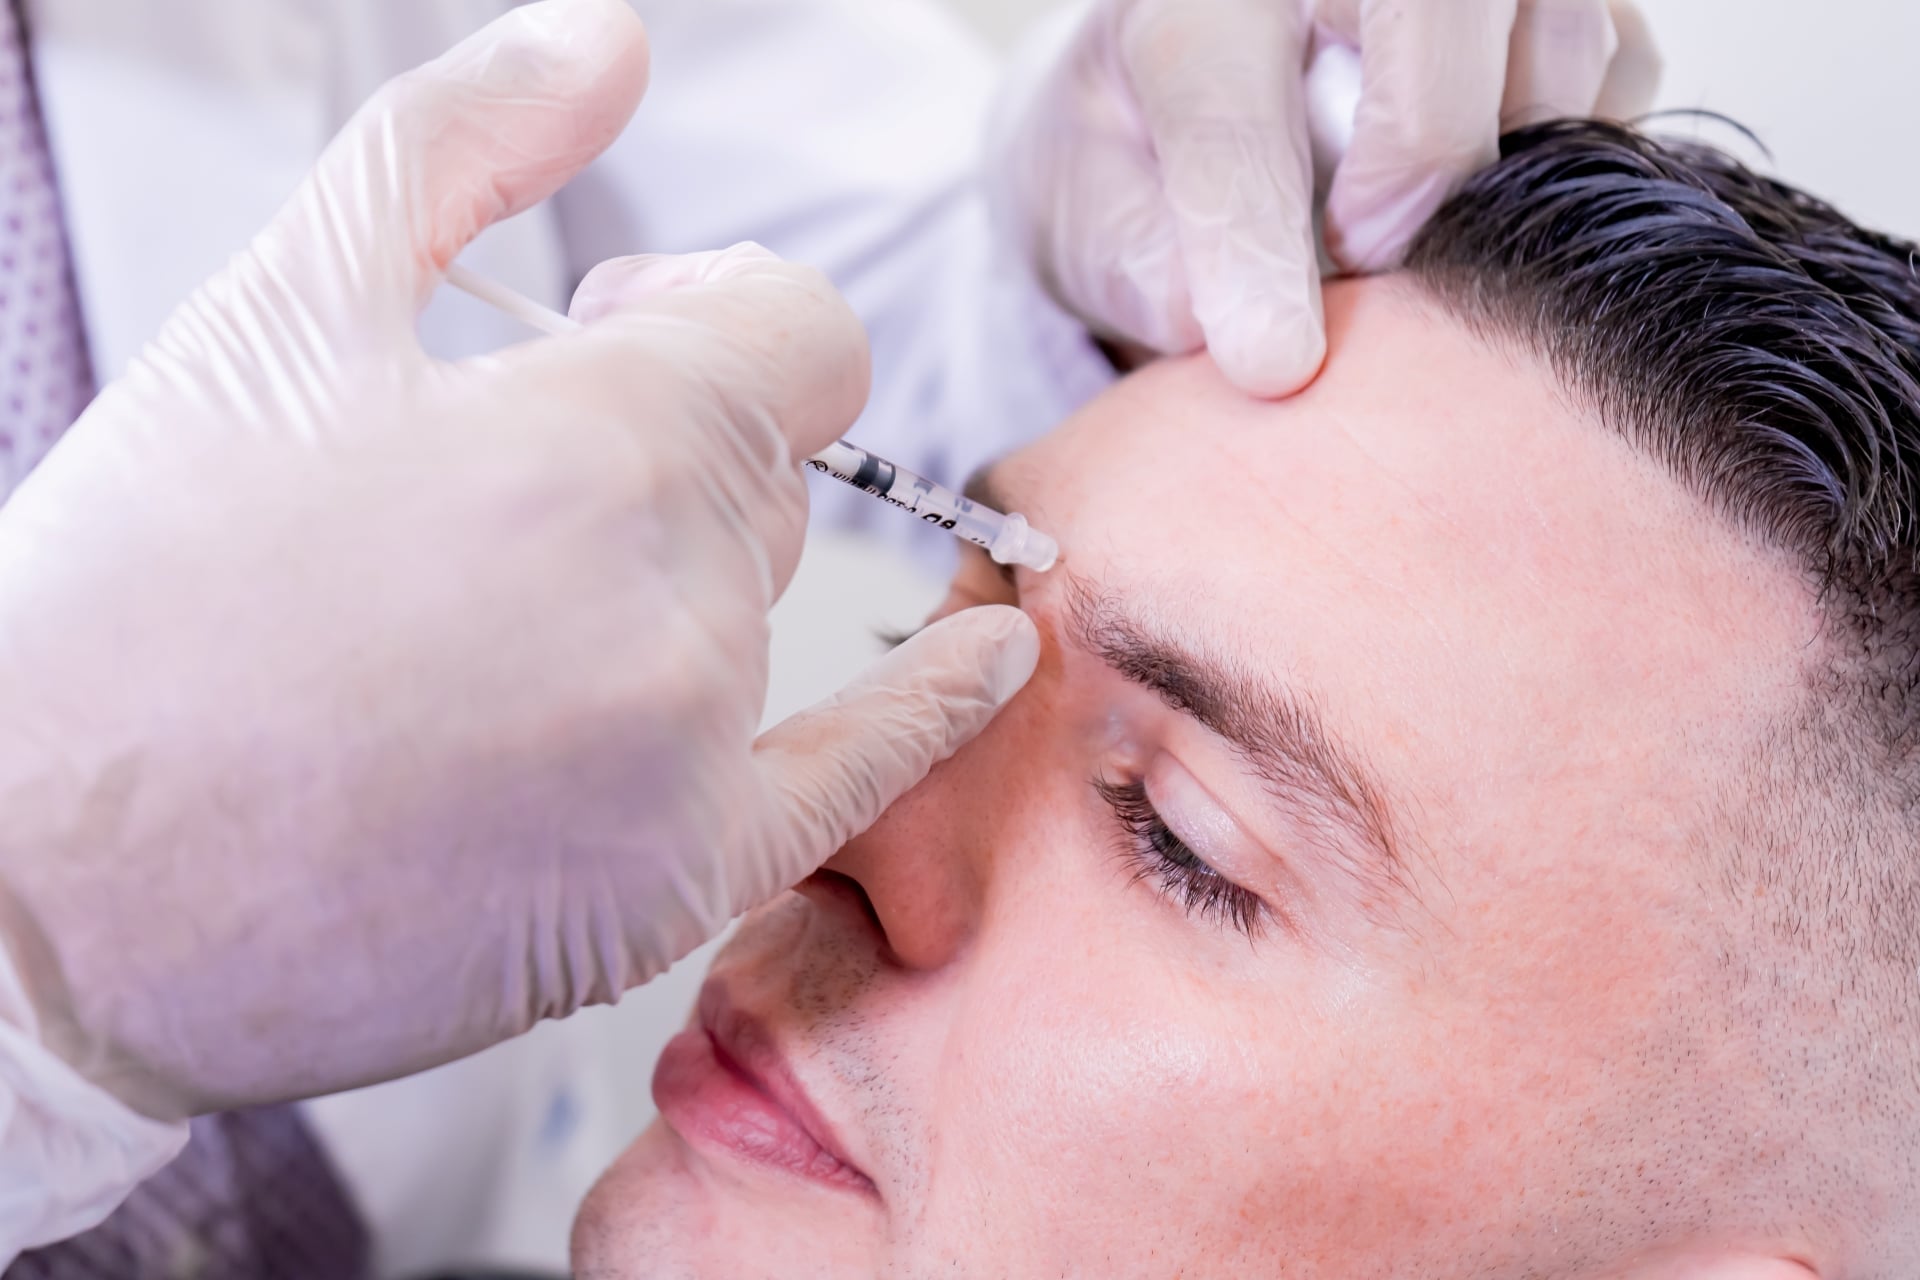 Botox and filler training courses